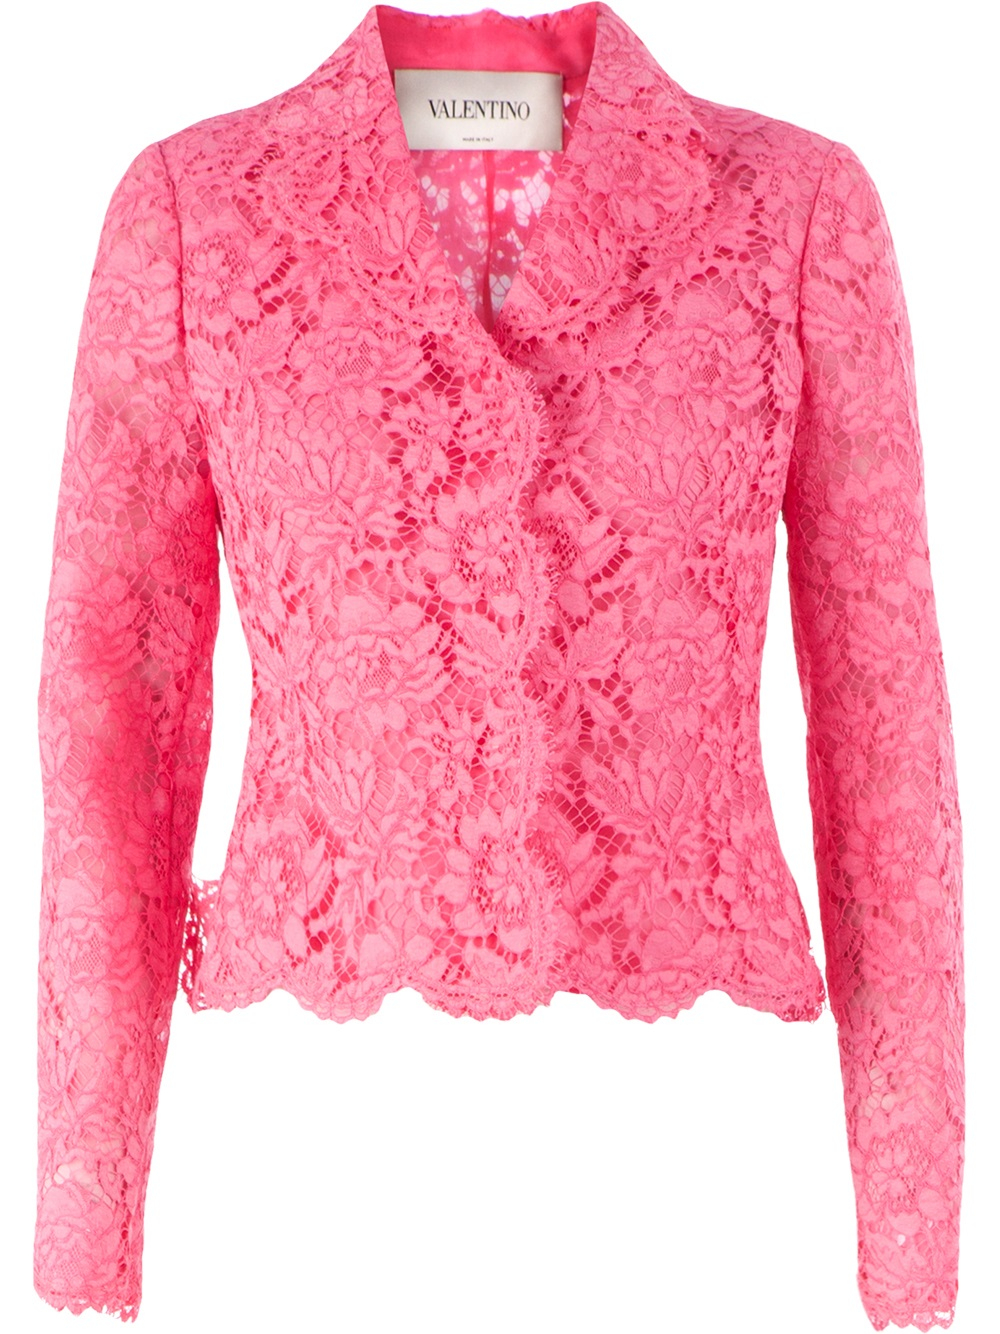 Valentino Floral Lace Jacket in Pink & Purple (Pink) - Lyst